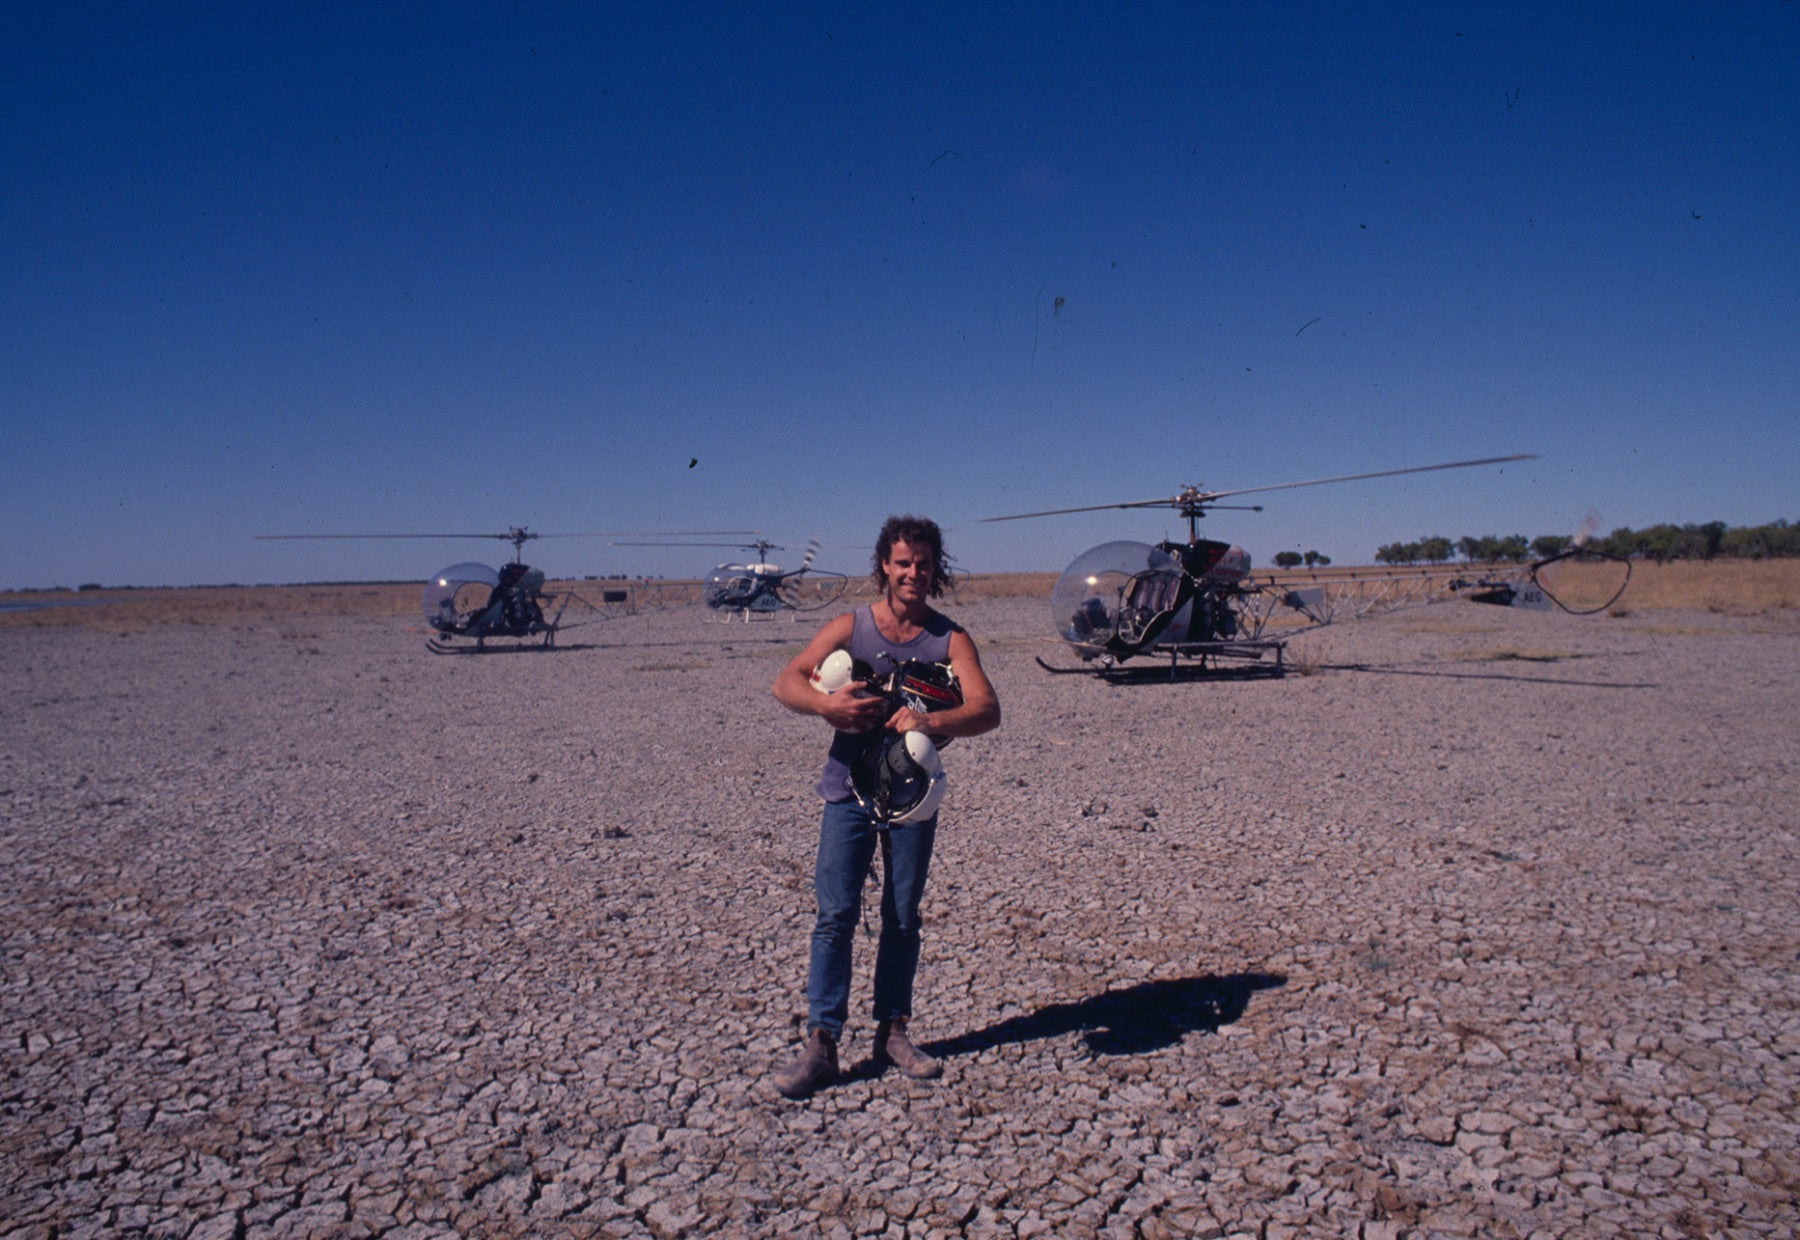 Early photograph of Peter Lik standing in a cracked, dry mud field in front of three helicopters holding a flight helmet